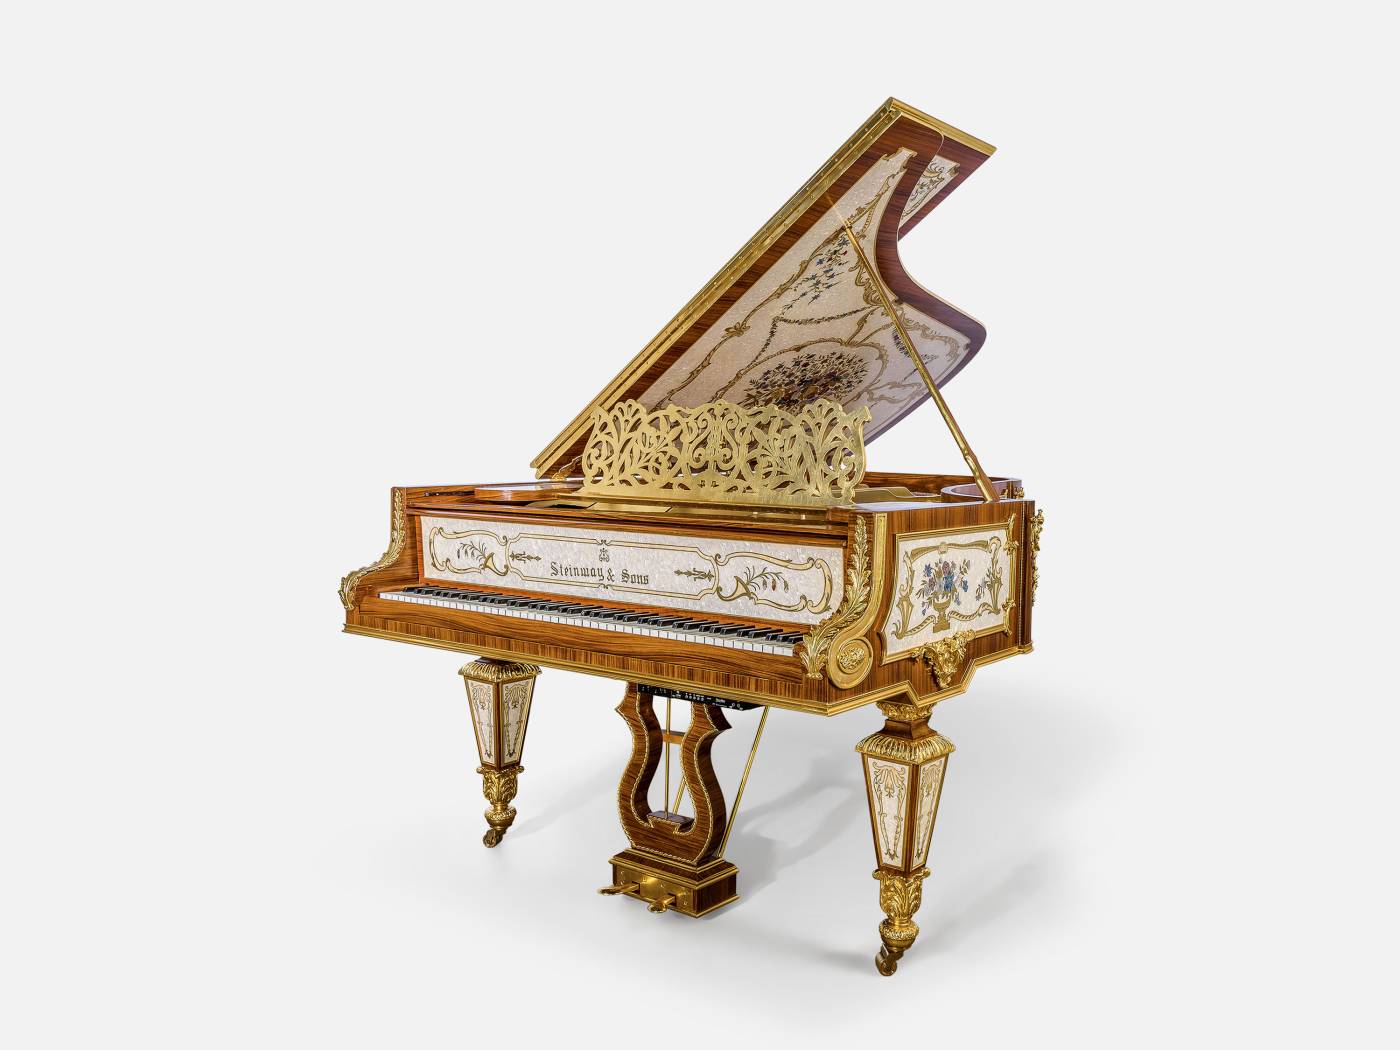 ART. 2707 – The elegance of luxury classic Pianos made in Italy by C.G. Capelletti.